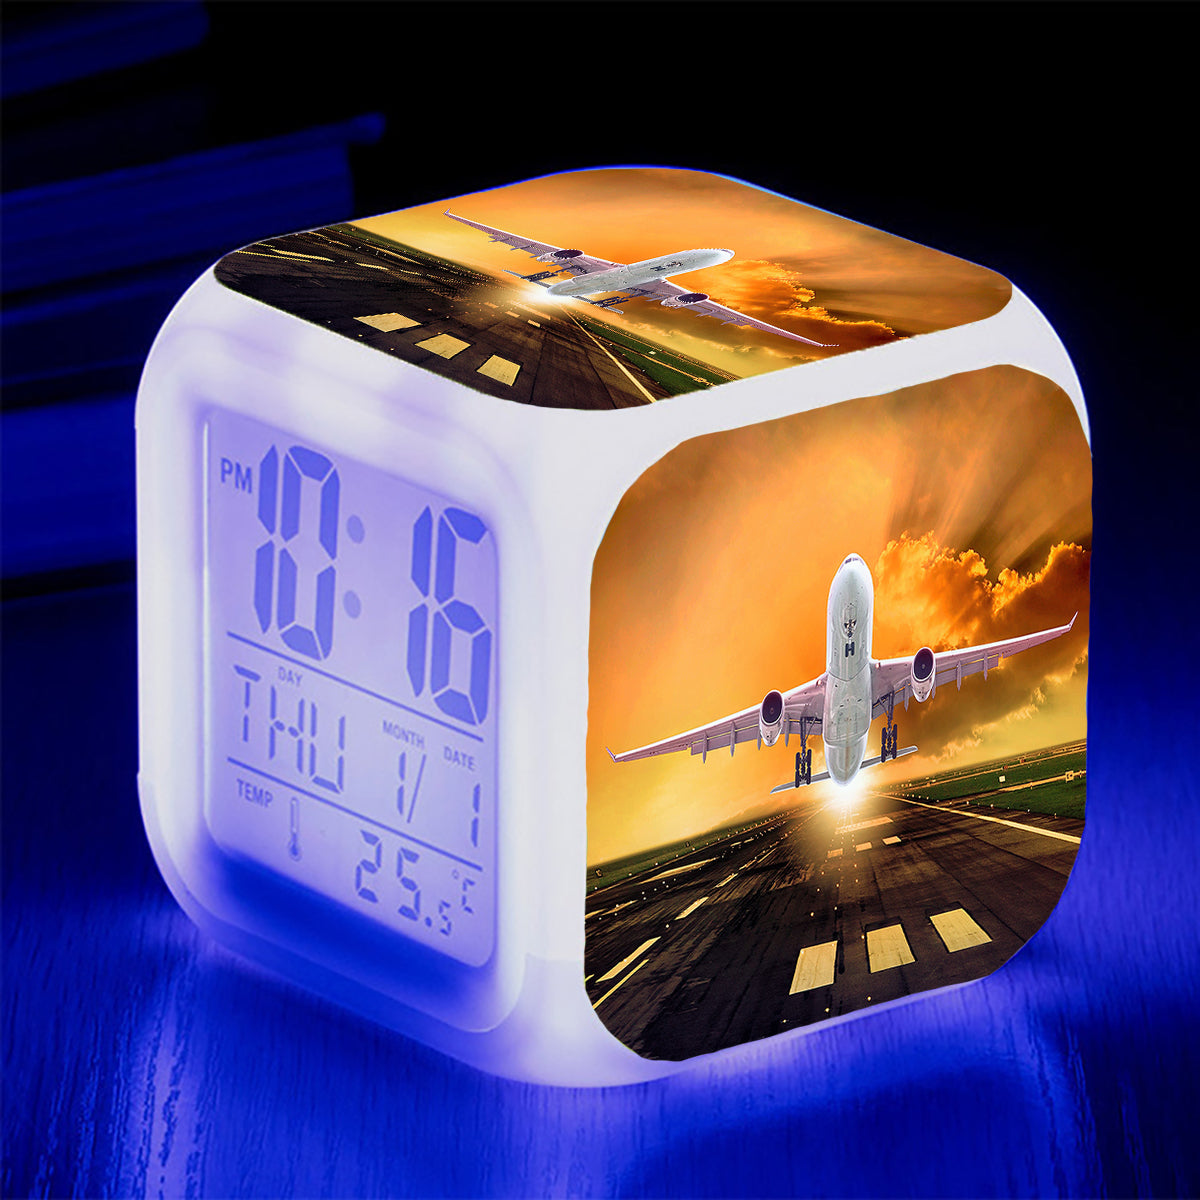 Amazing Departing Aircraft Sunset & Clouds Behind Designed "7 Colour" Digital Alarm Clock